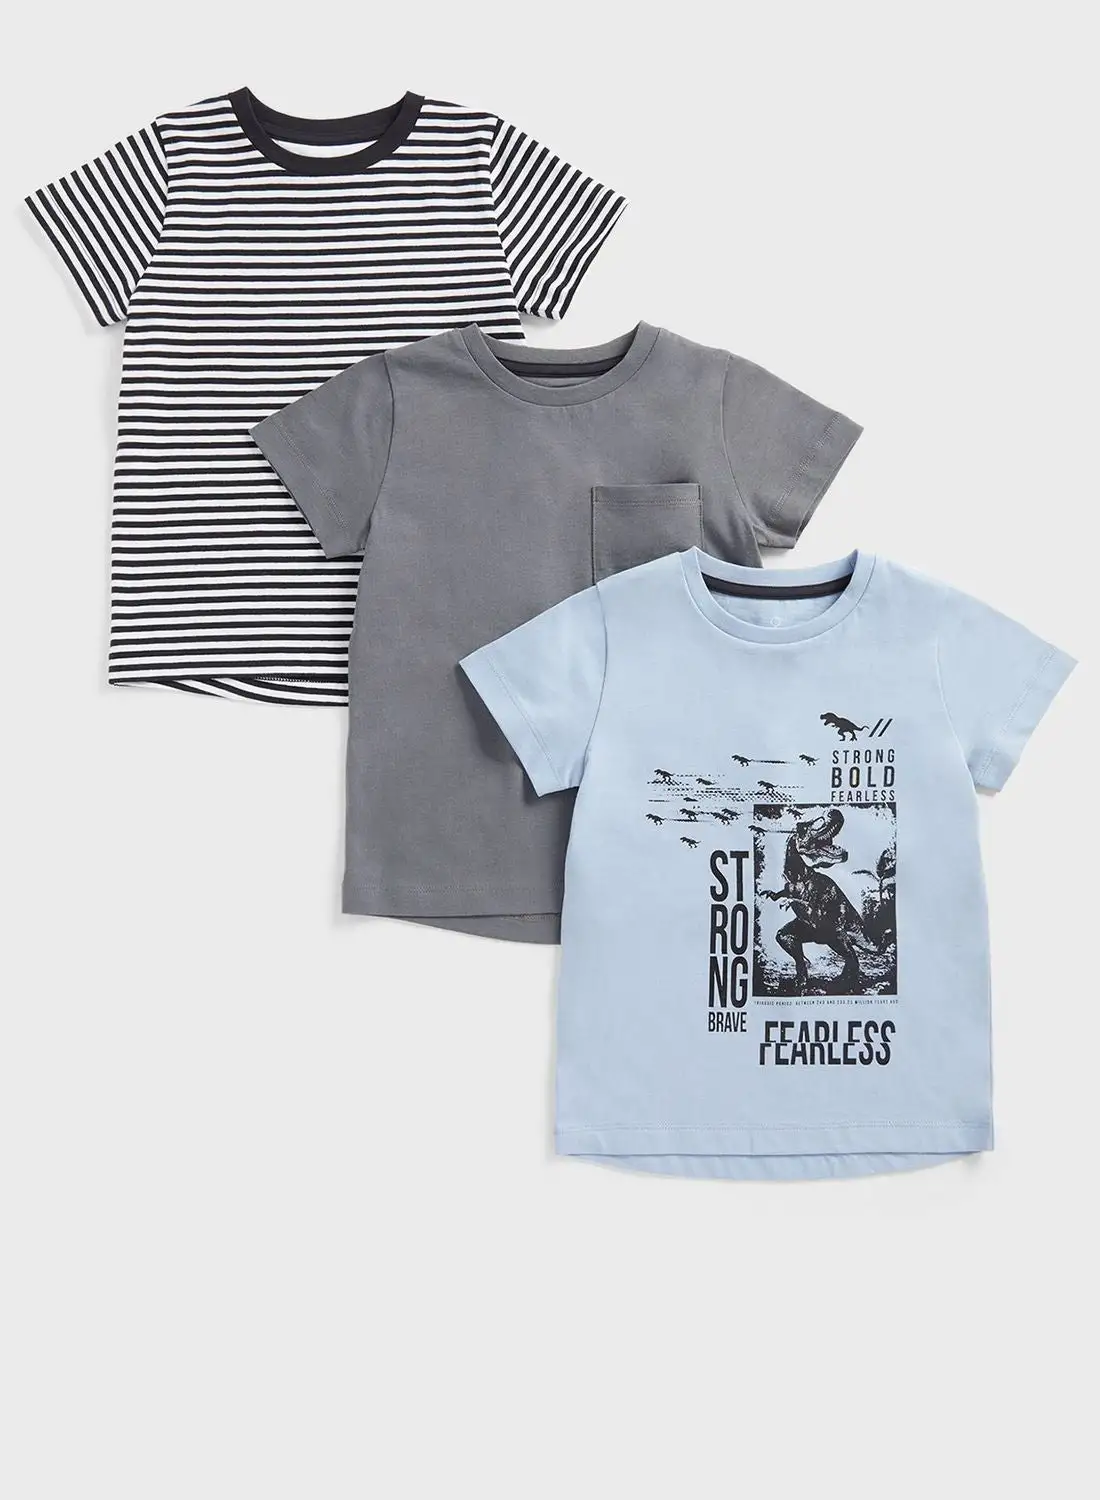 mothercare Kids 3 Pack Assorted T-Shirts